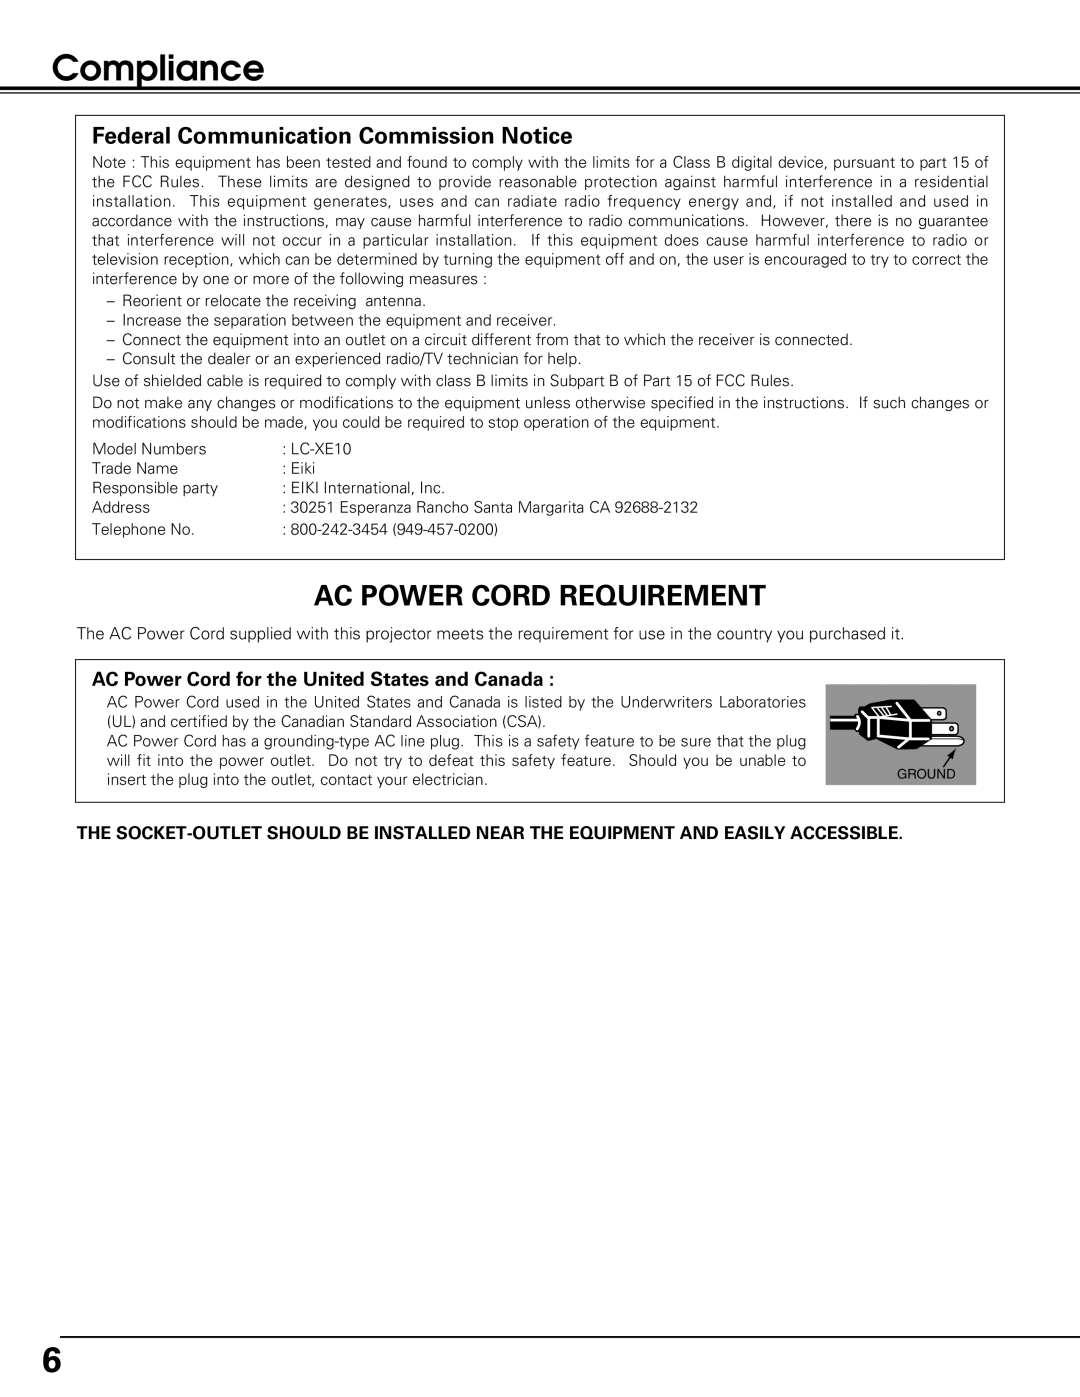 Black Box LC-XE10 instruction manual Compliance, Ac Power Cord Requirement, Federal Communication Commission Notice 